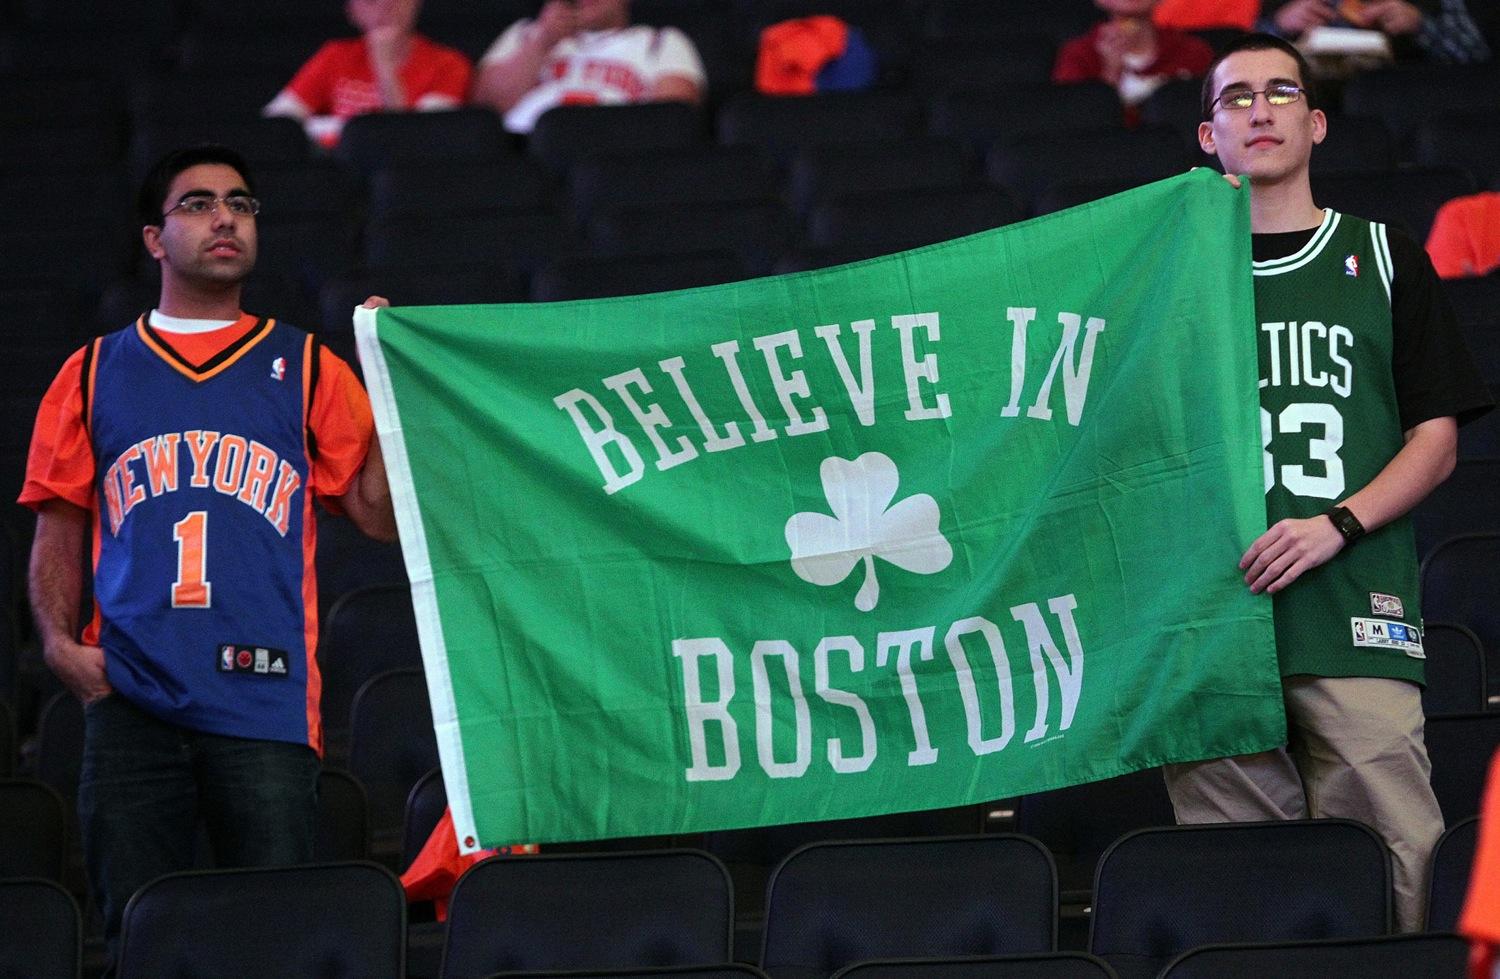 A New York Knicks and Boston Celtics fan hold up a sign on Saturday, April 20, 2013, to pay tribute to the victims of the Boston Marathon. The Boston Celtics faced the New York Knicks in the NBA's Eastern Conference playoffs in New York, New York. (Matt Stone/Boston Herald/MCT)